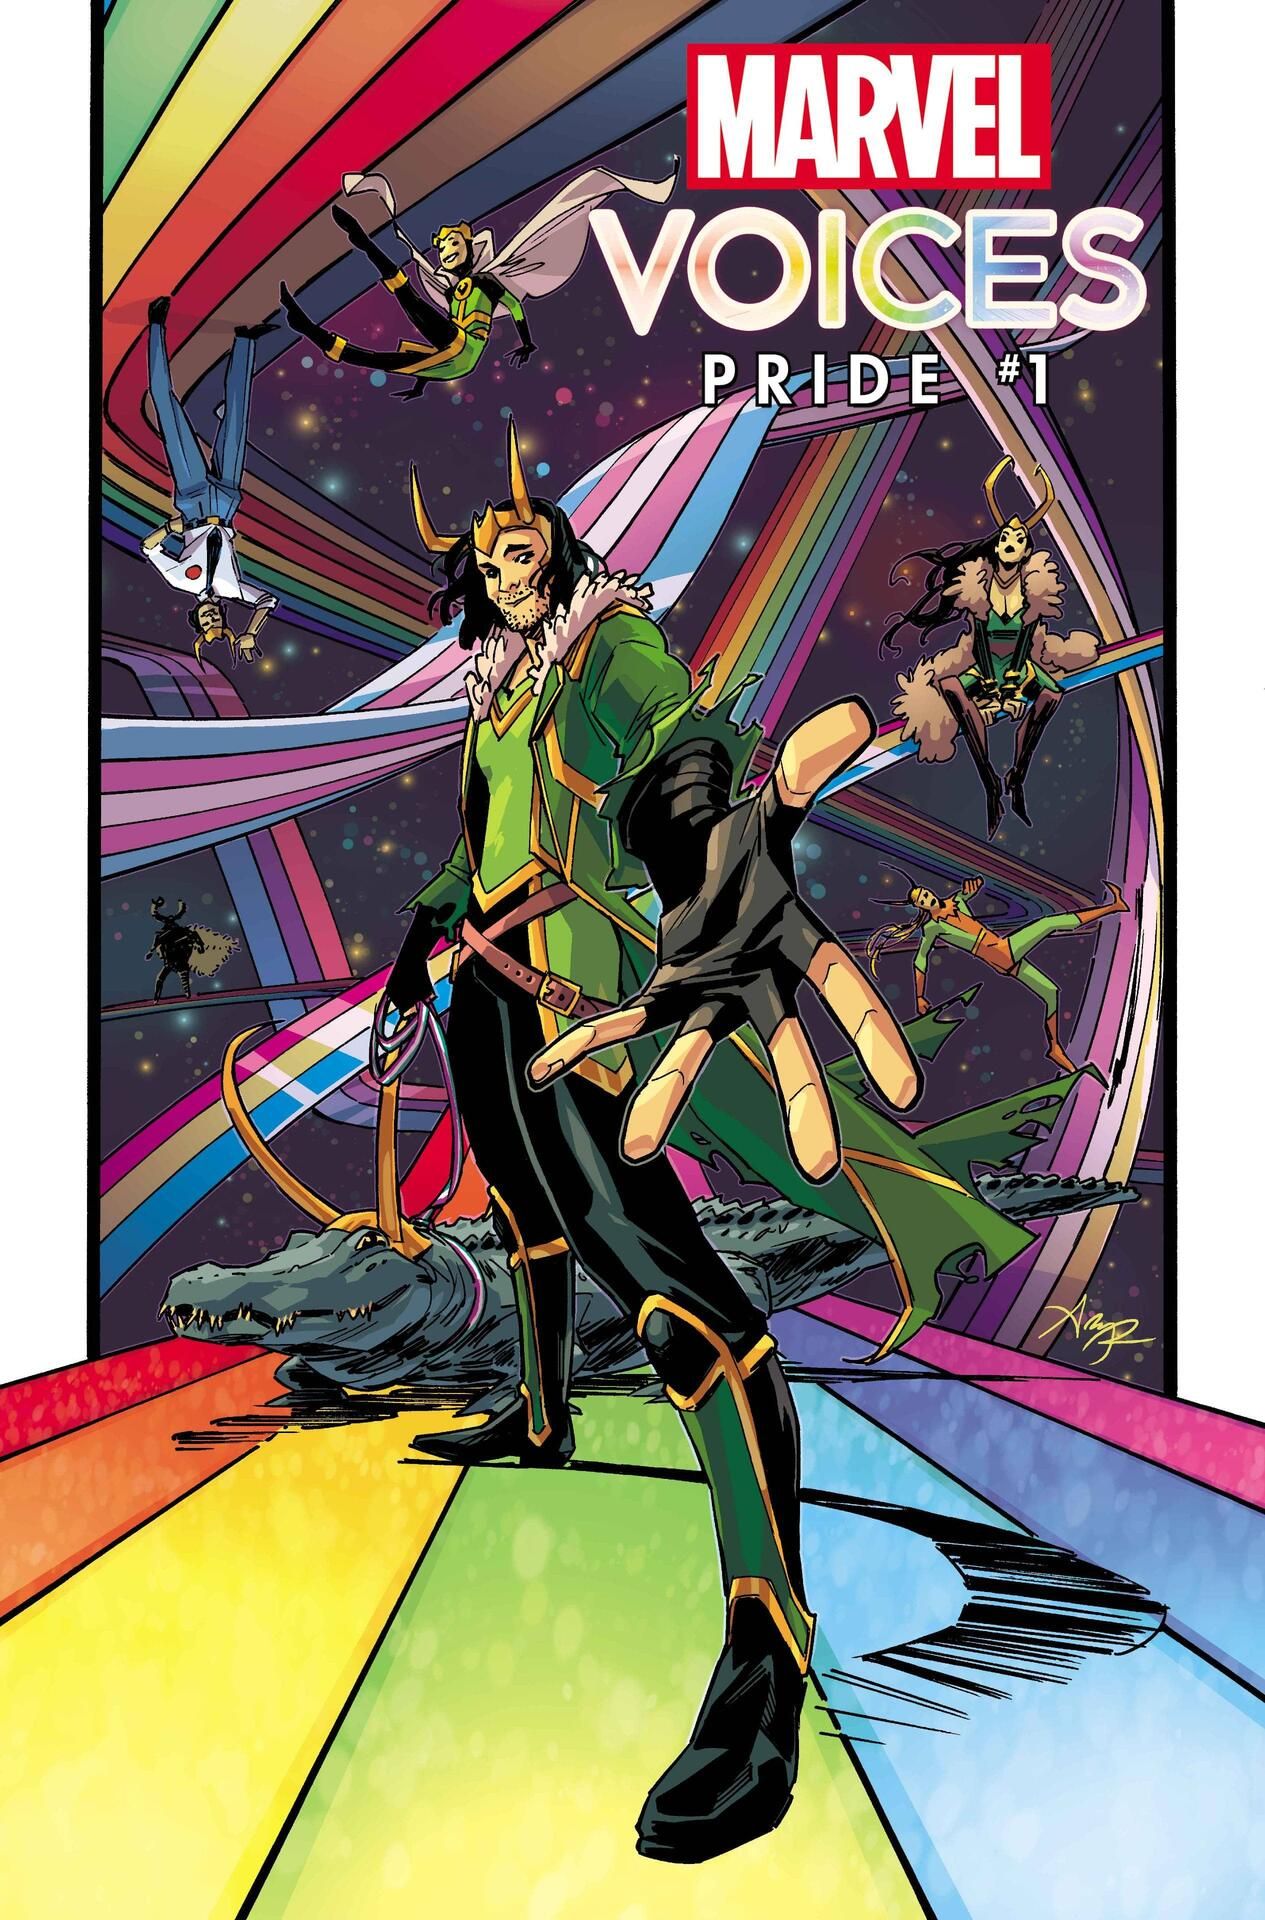 Variant cover featuring Loki for Voices: Pride 2022.